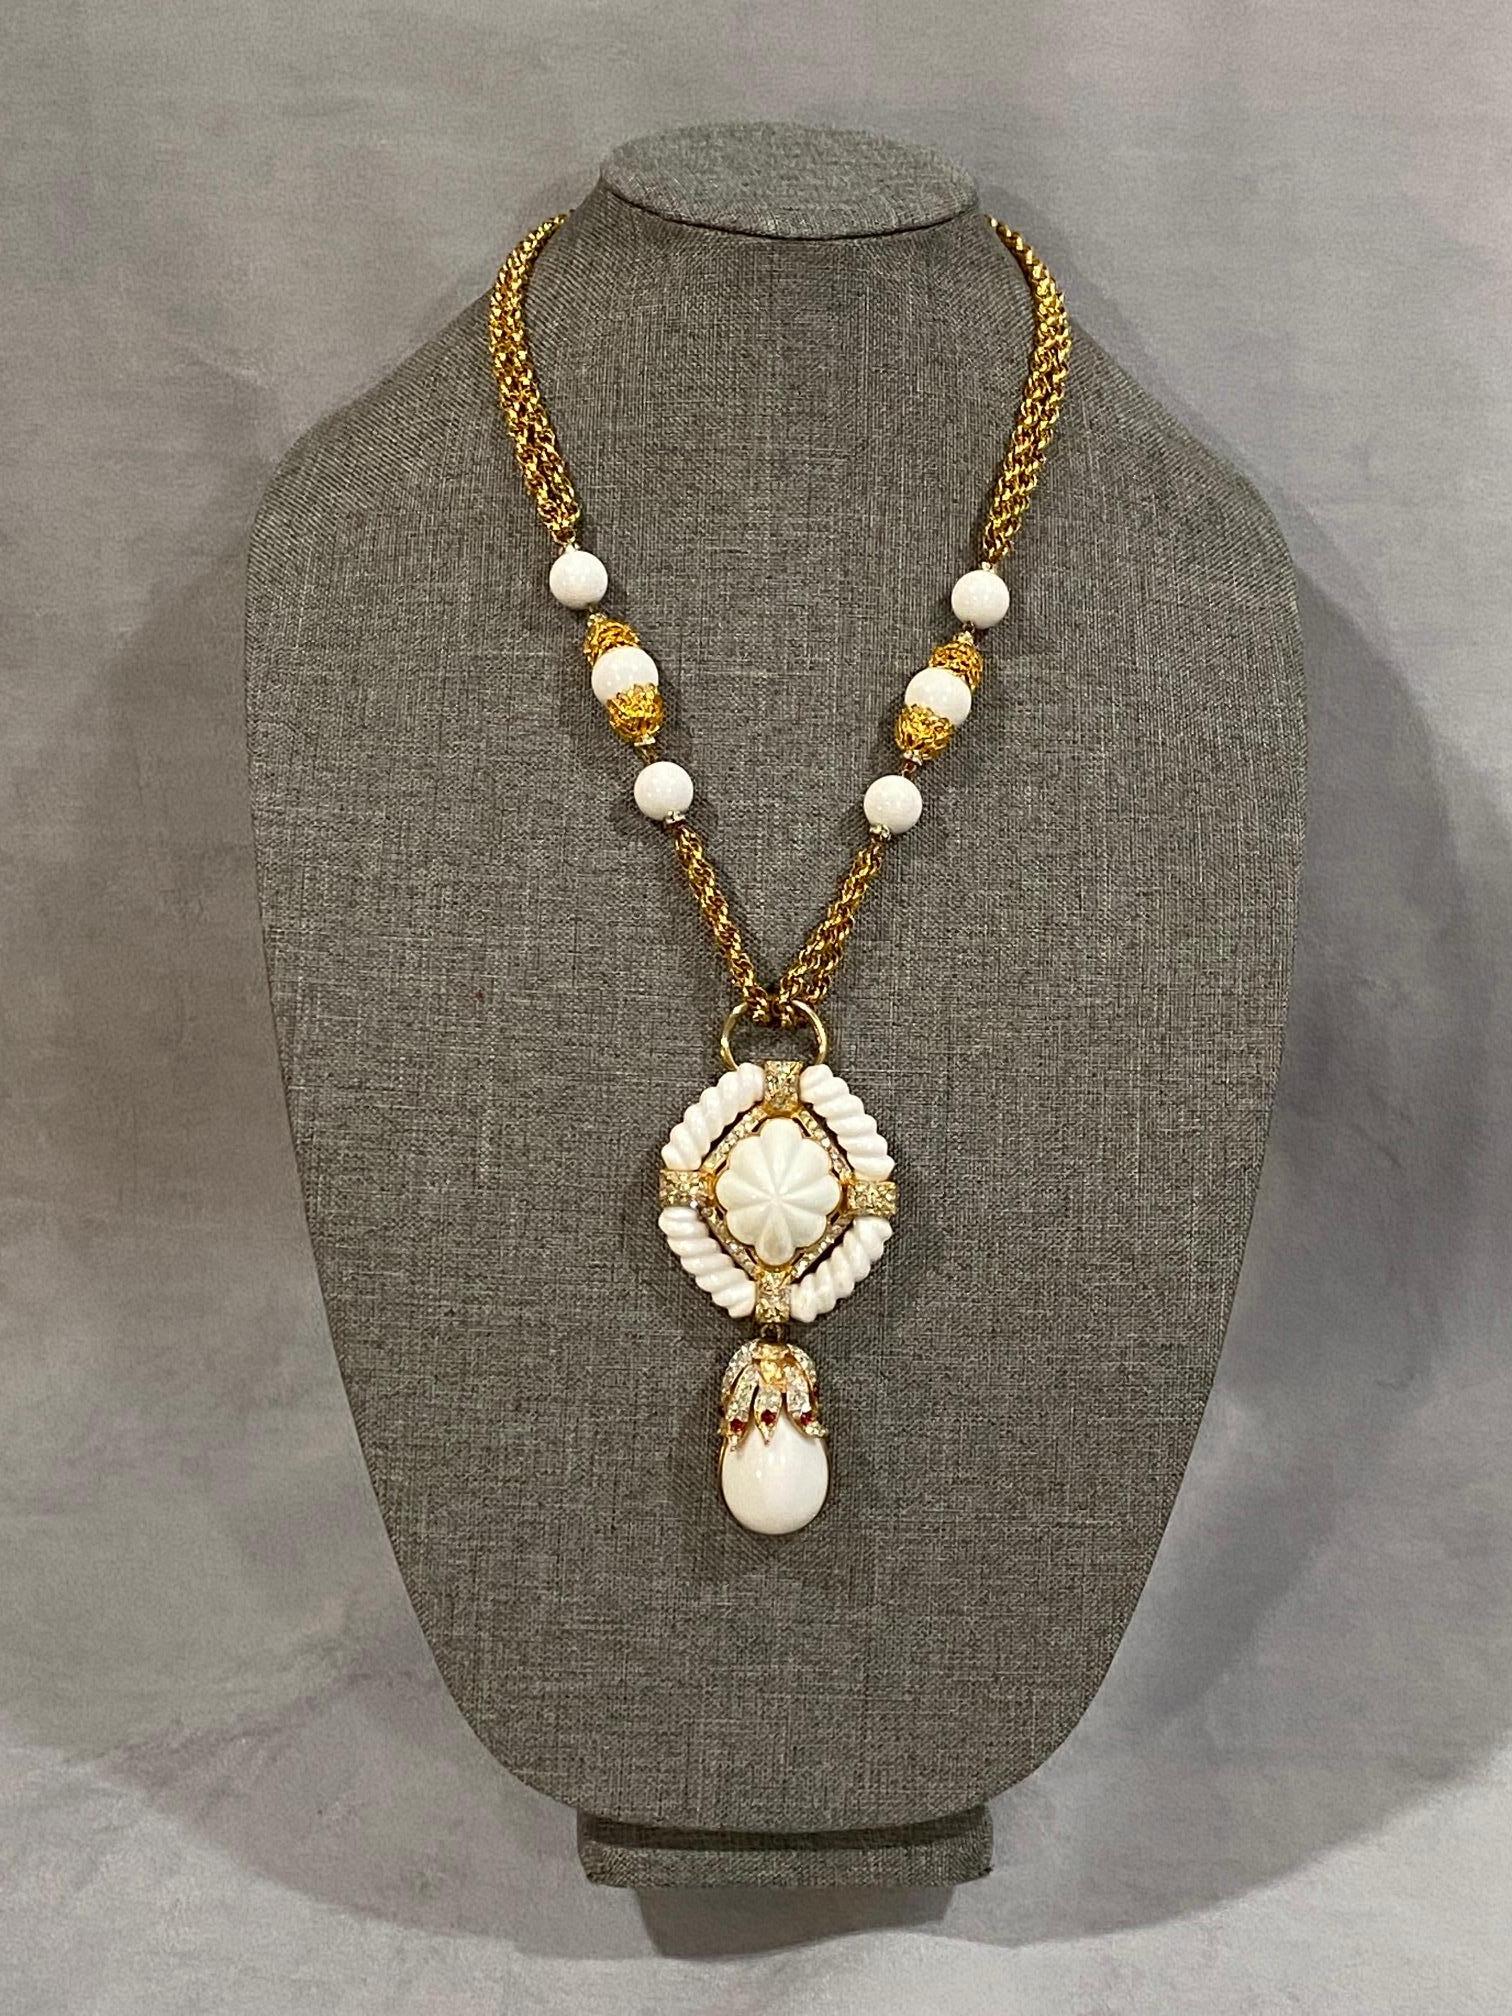 Les Bernard 1980s Pendant Necklace in Gold & White with Rhinestone Accent For Sale 2